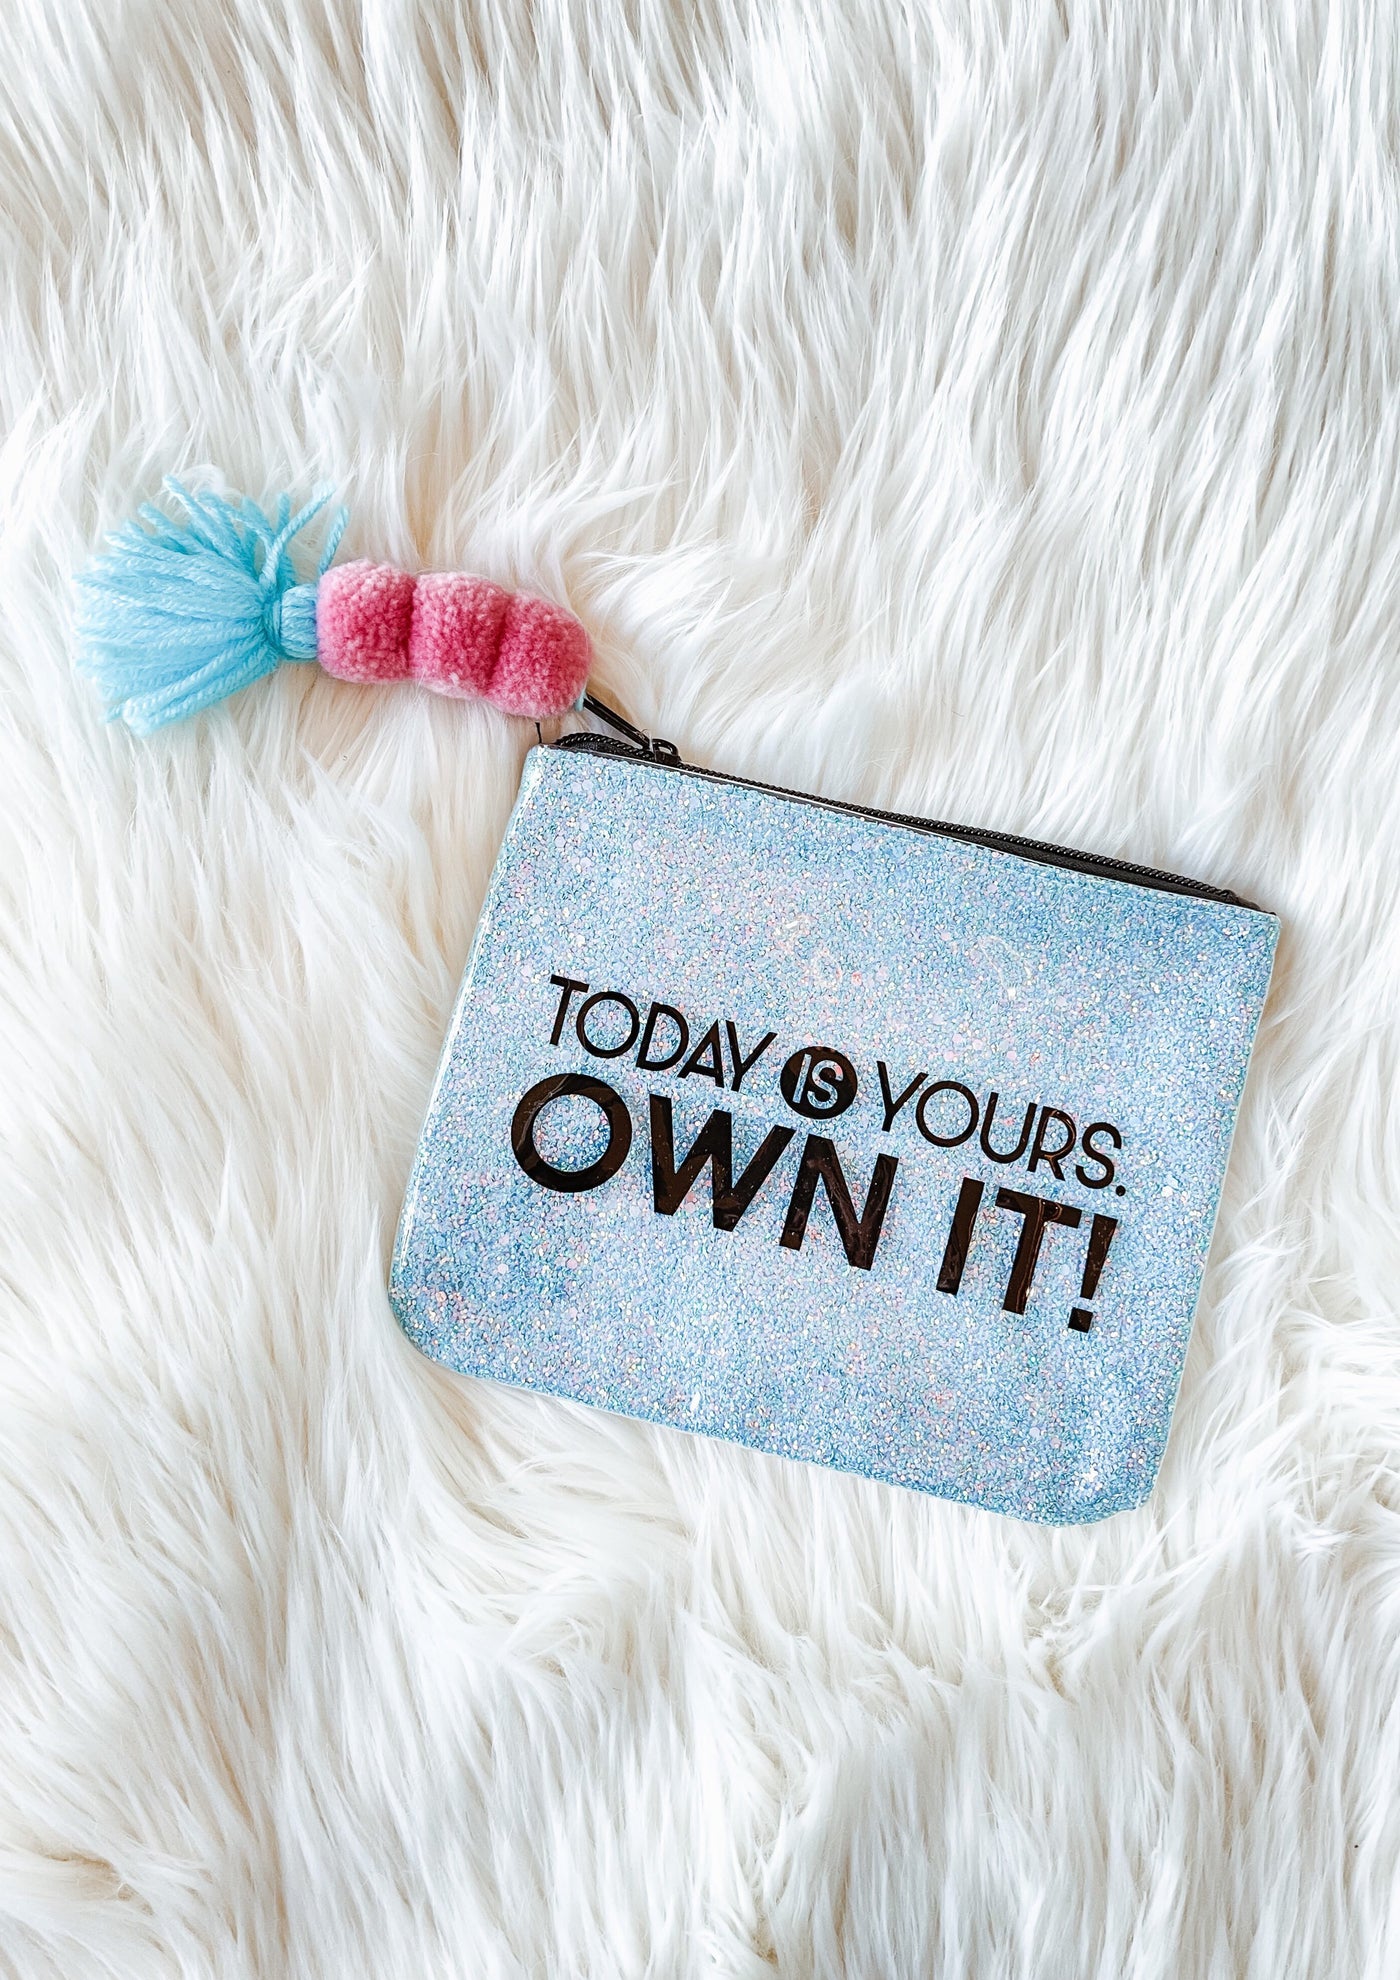 Today is Yours. Own it! Glitter Bag